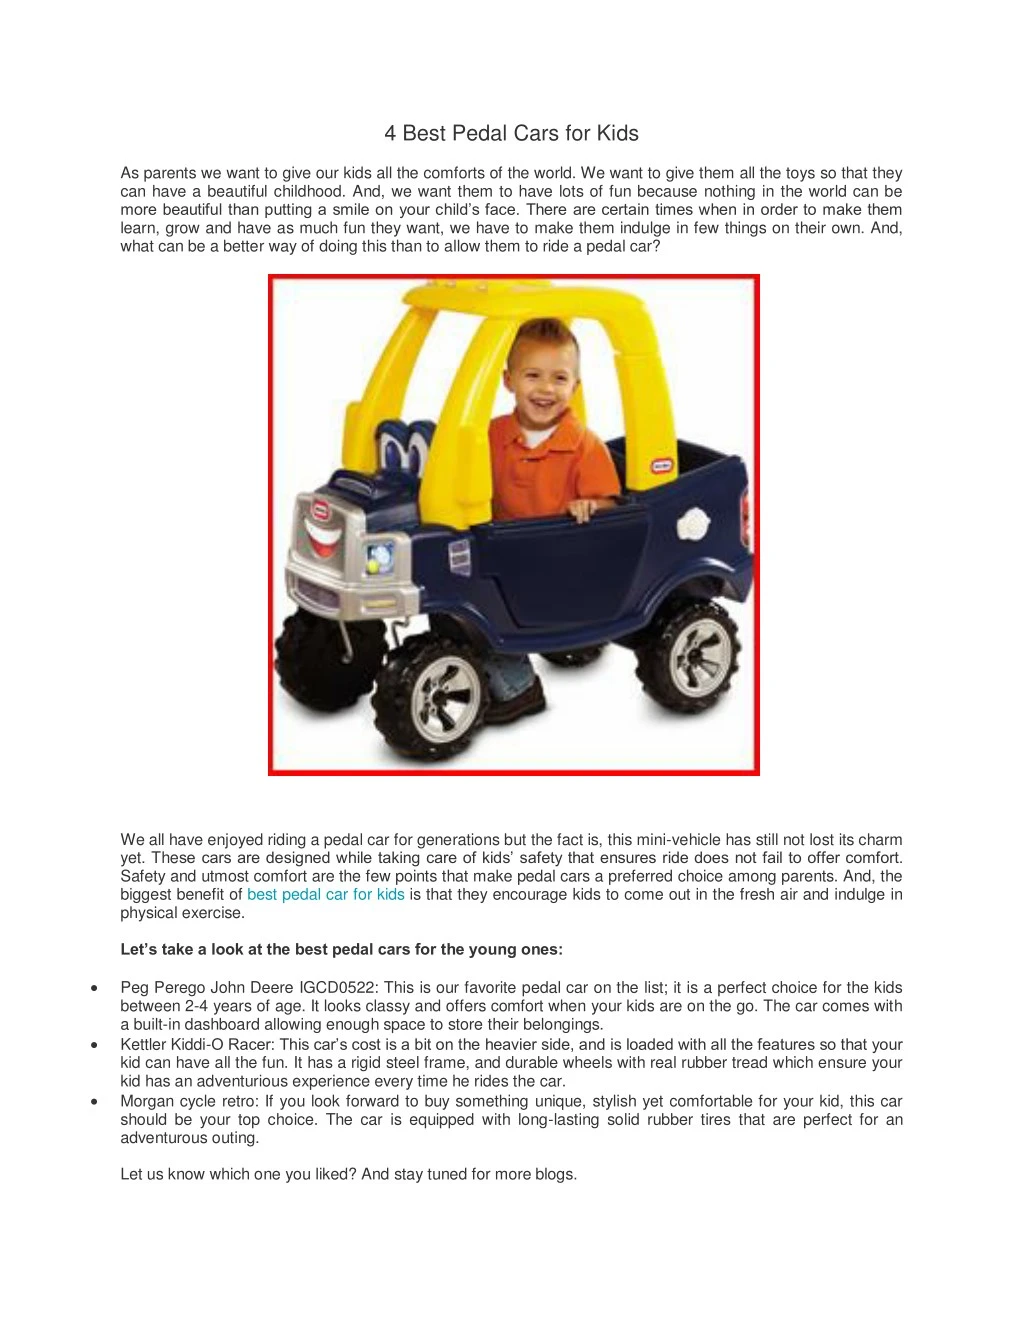 4 best pedal cars for kids